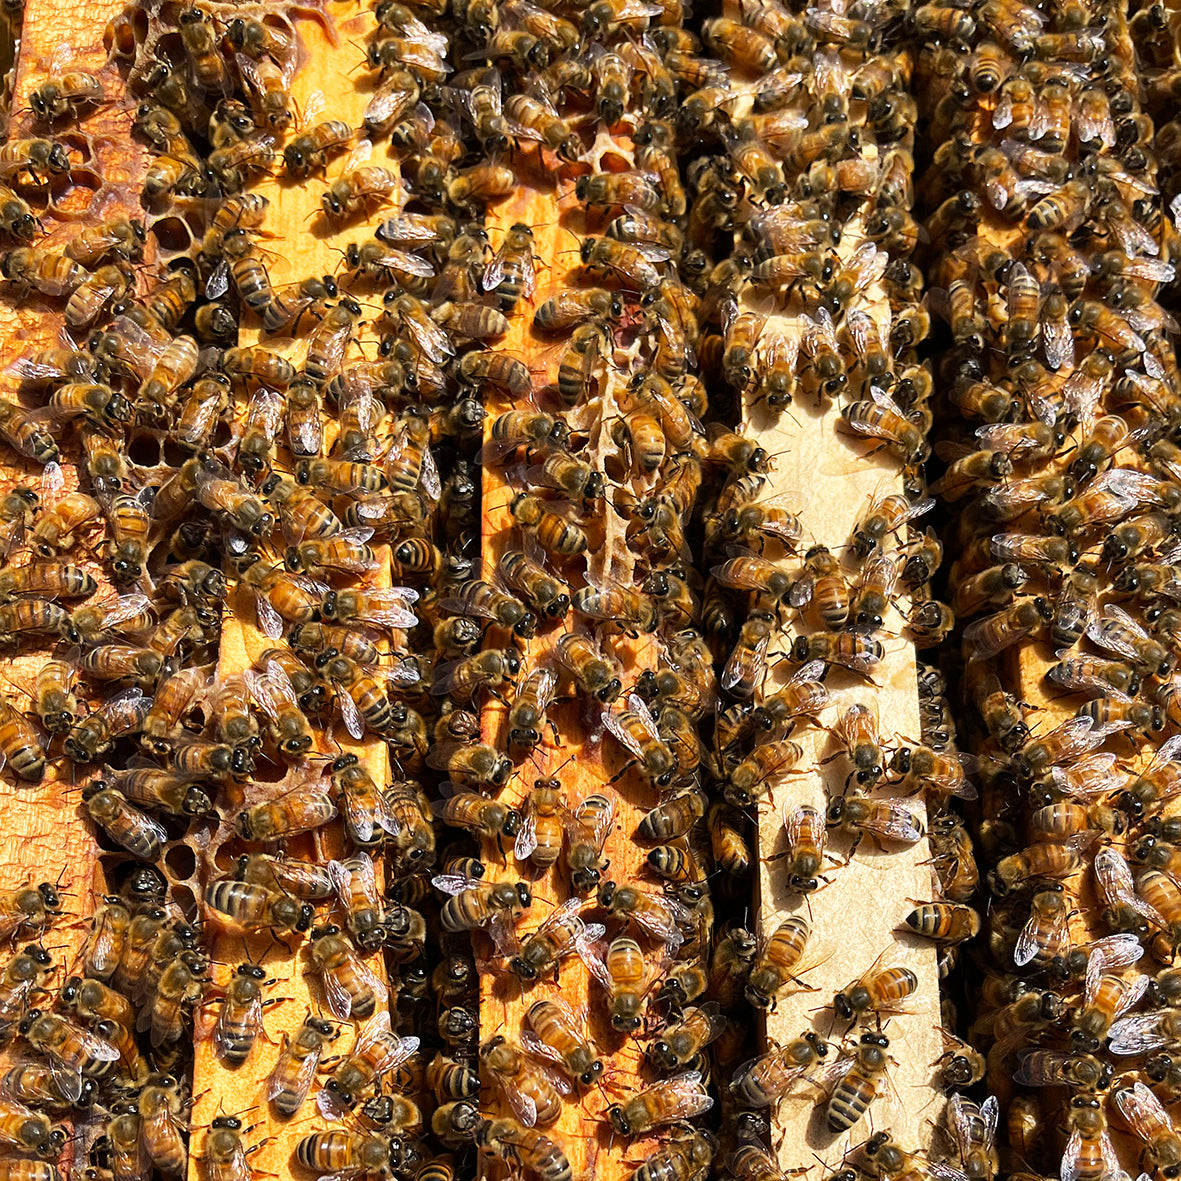 Apply Now For a Chance to Sample Our Natural, Hive-Powered Products!